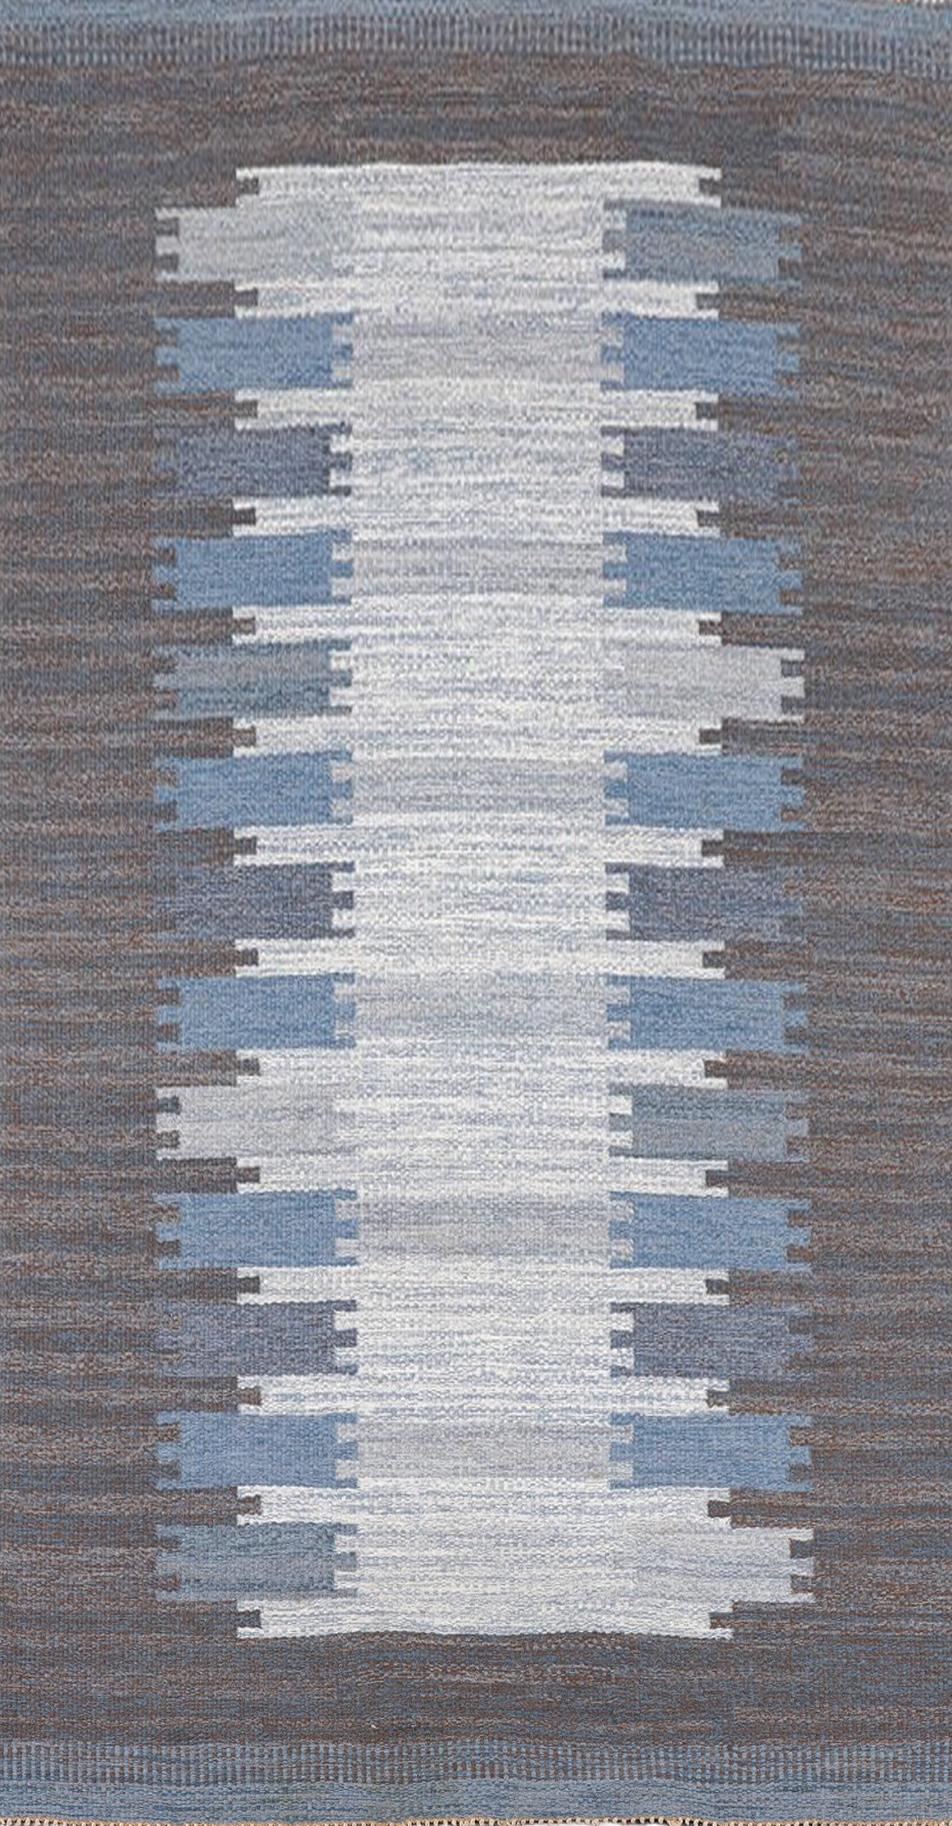 This vintage Swedish rug, hand woven wool, flatweave ‘rolläkan’ was designed by Margareta Lundahl, master weaver in the Mid-20th Century in Sweden. This rug dates to around 1950s. Geometric pattern in (light) grey and blue, 250 x 151 cm. Signed